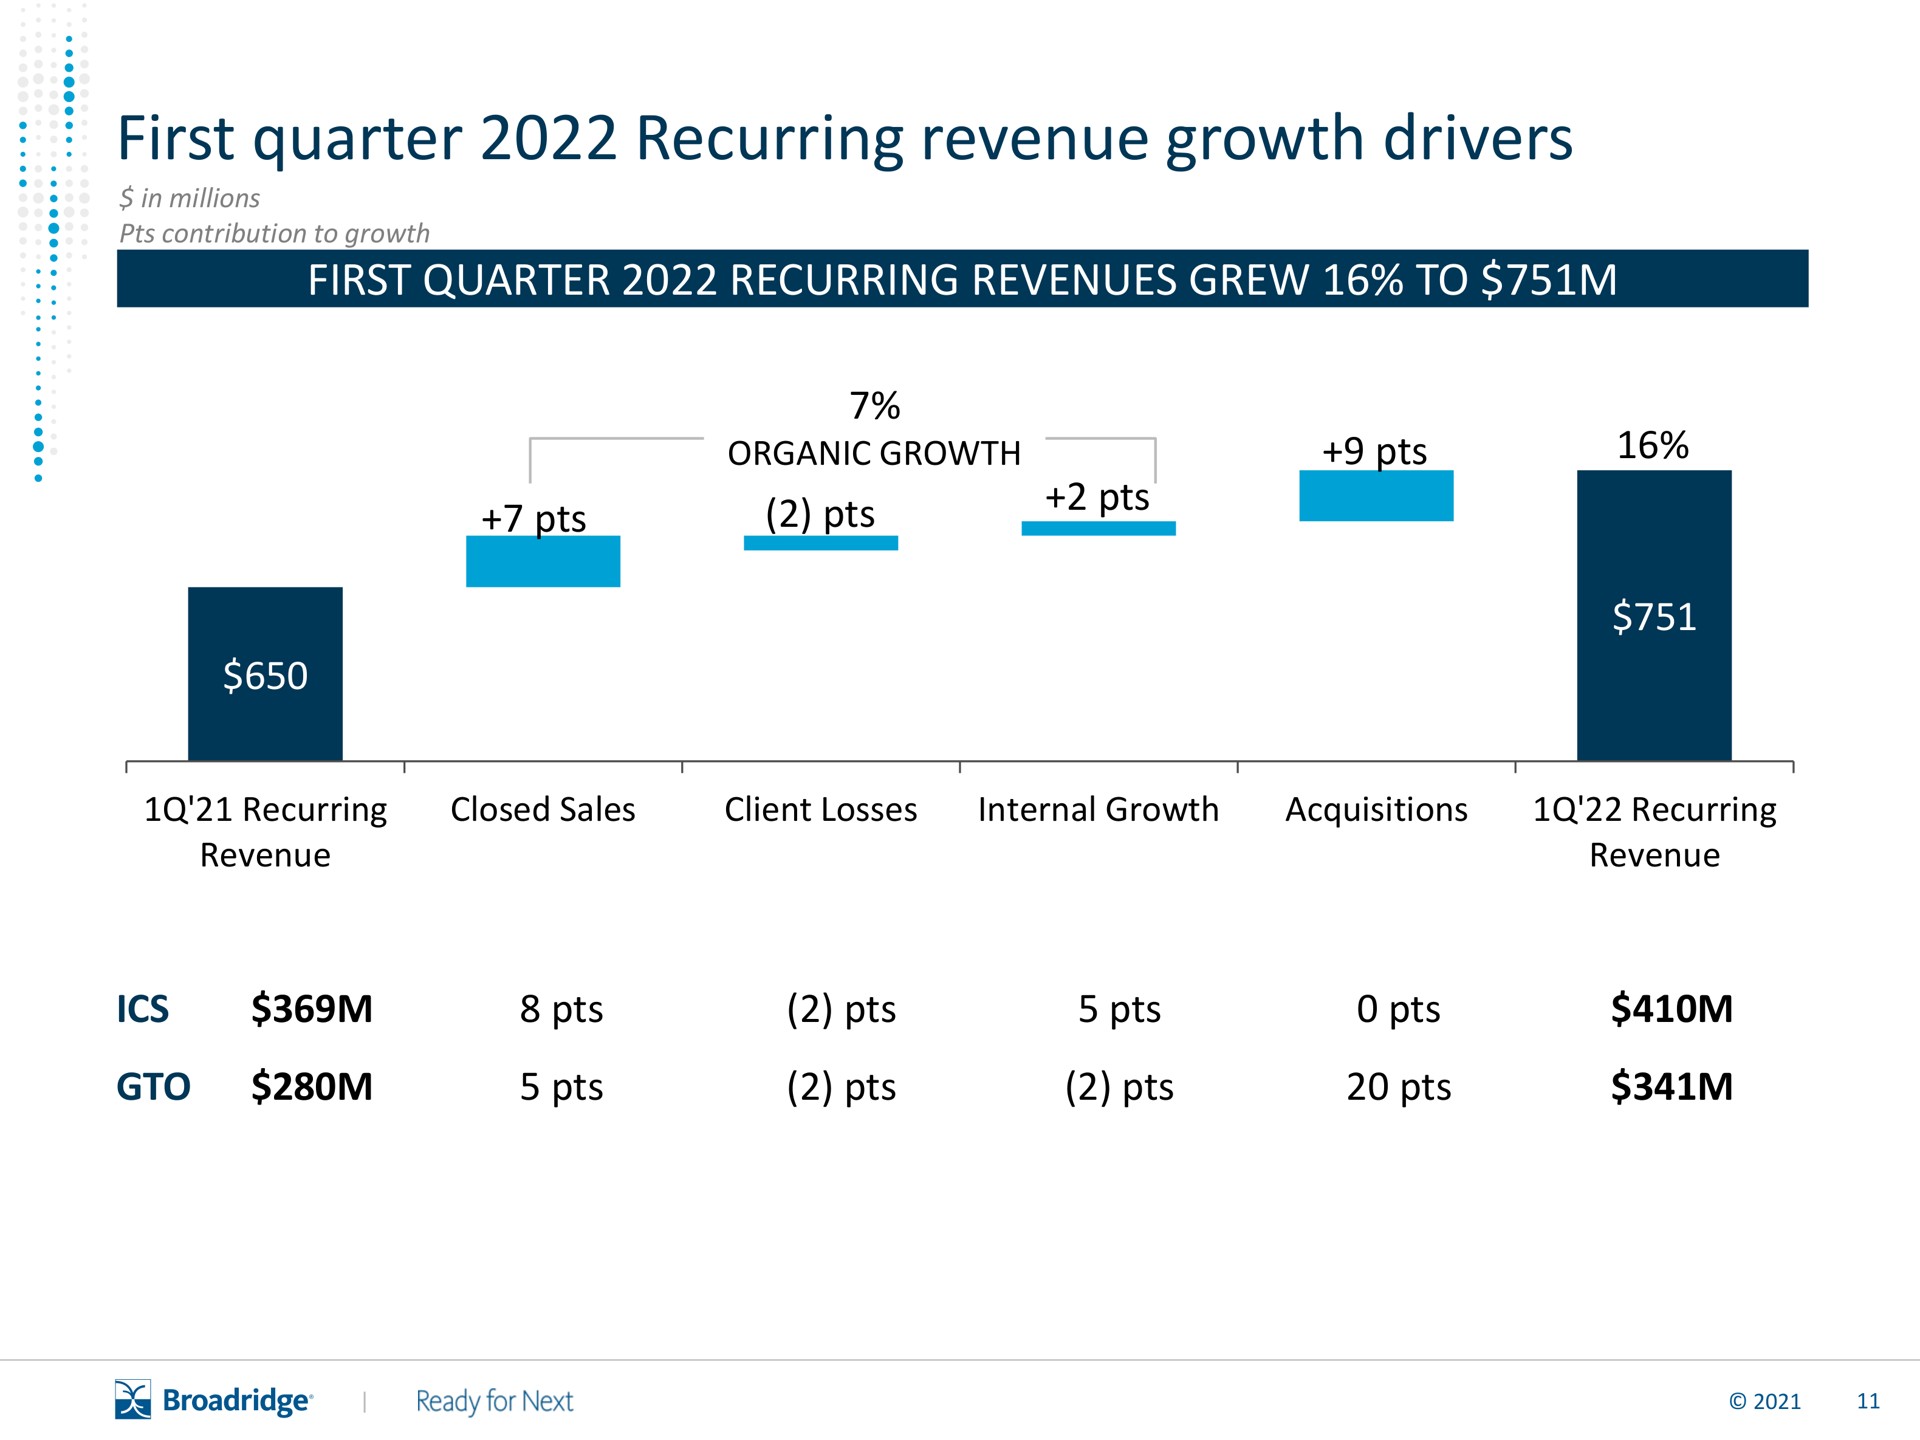 first quarter recurring revenue growth drivers | Broadridge Financial Solutions